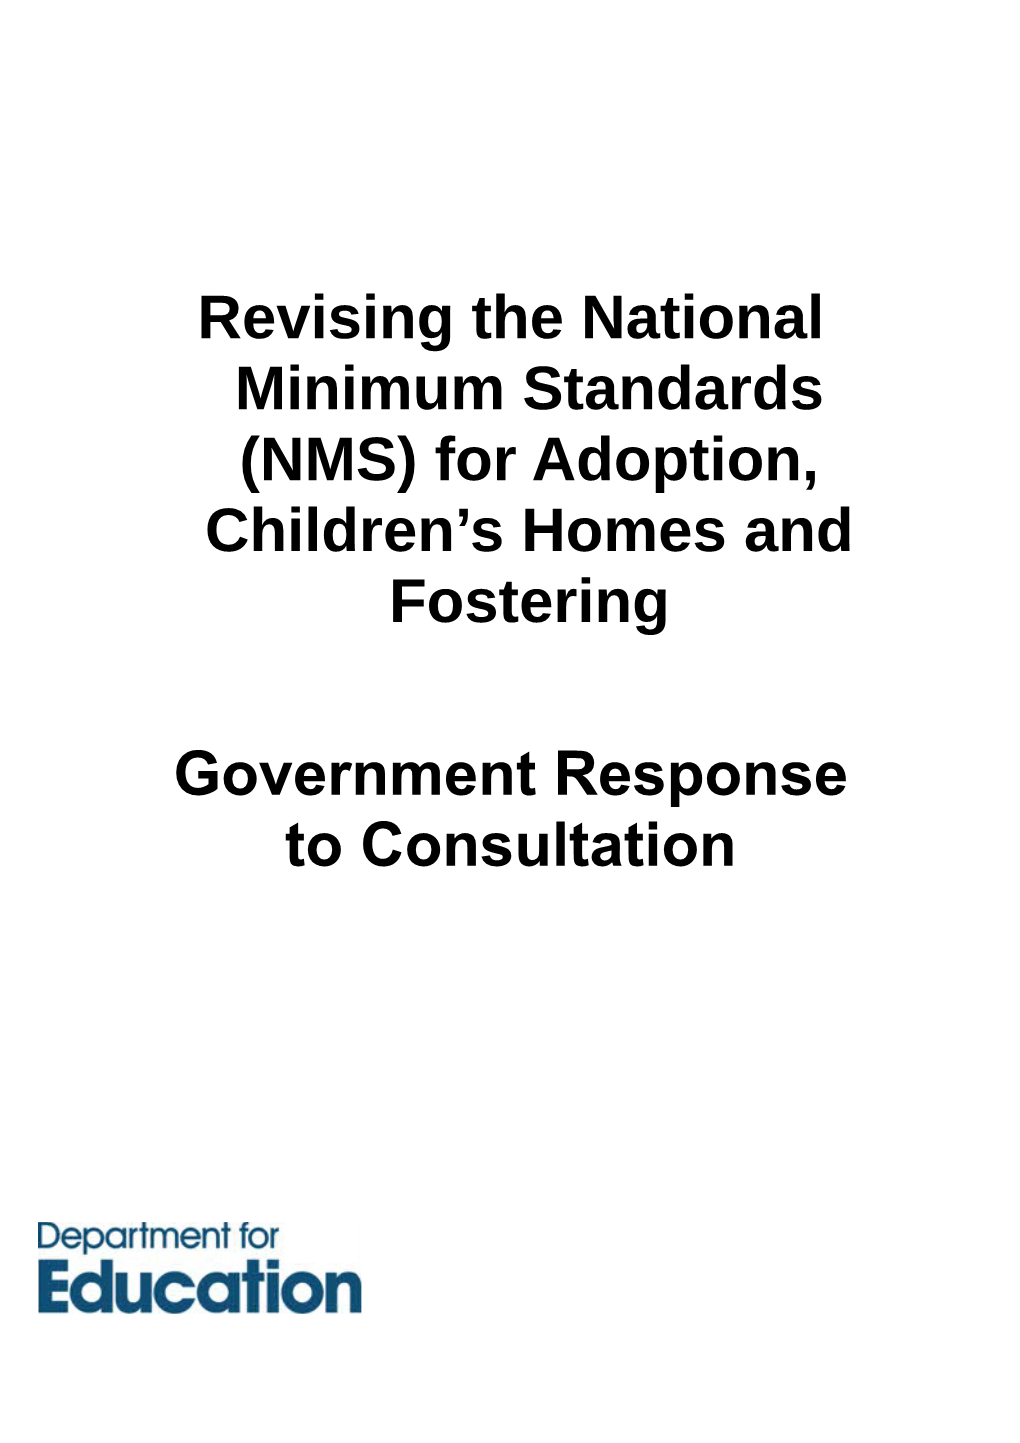 NMS Govt Response to Consultation